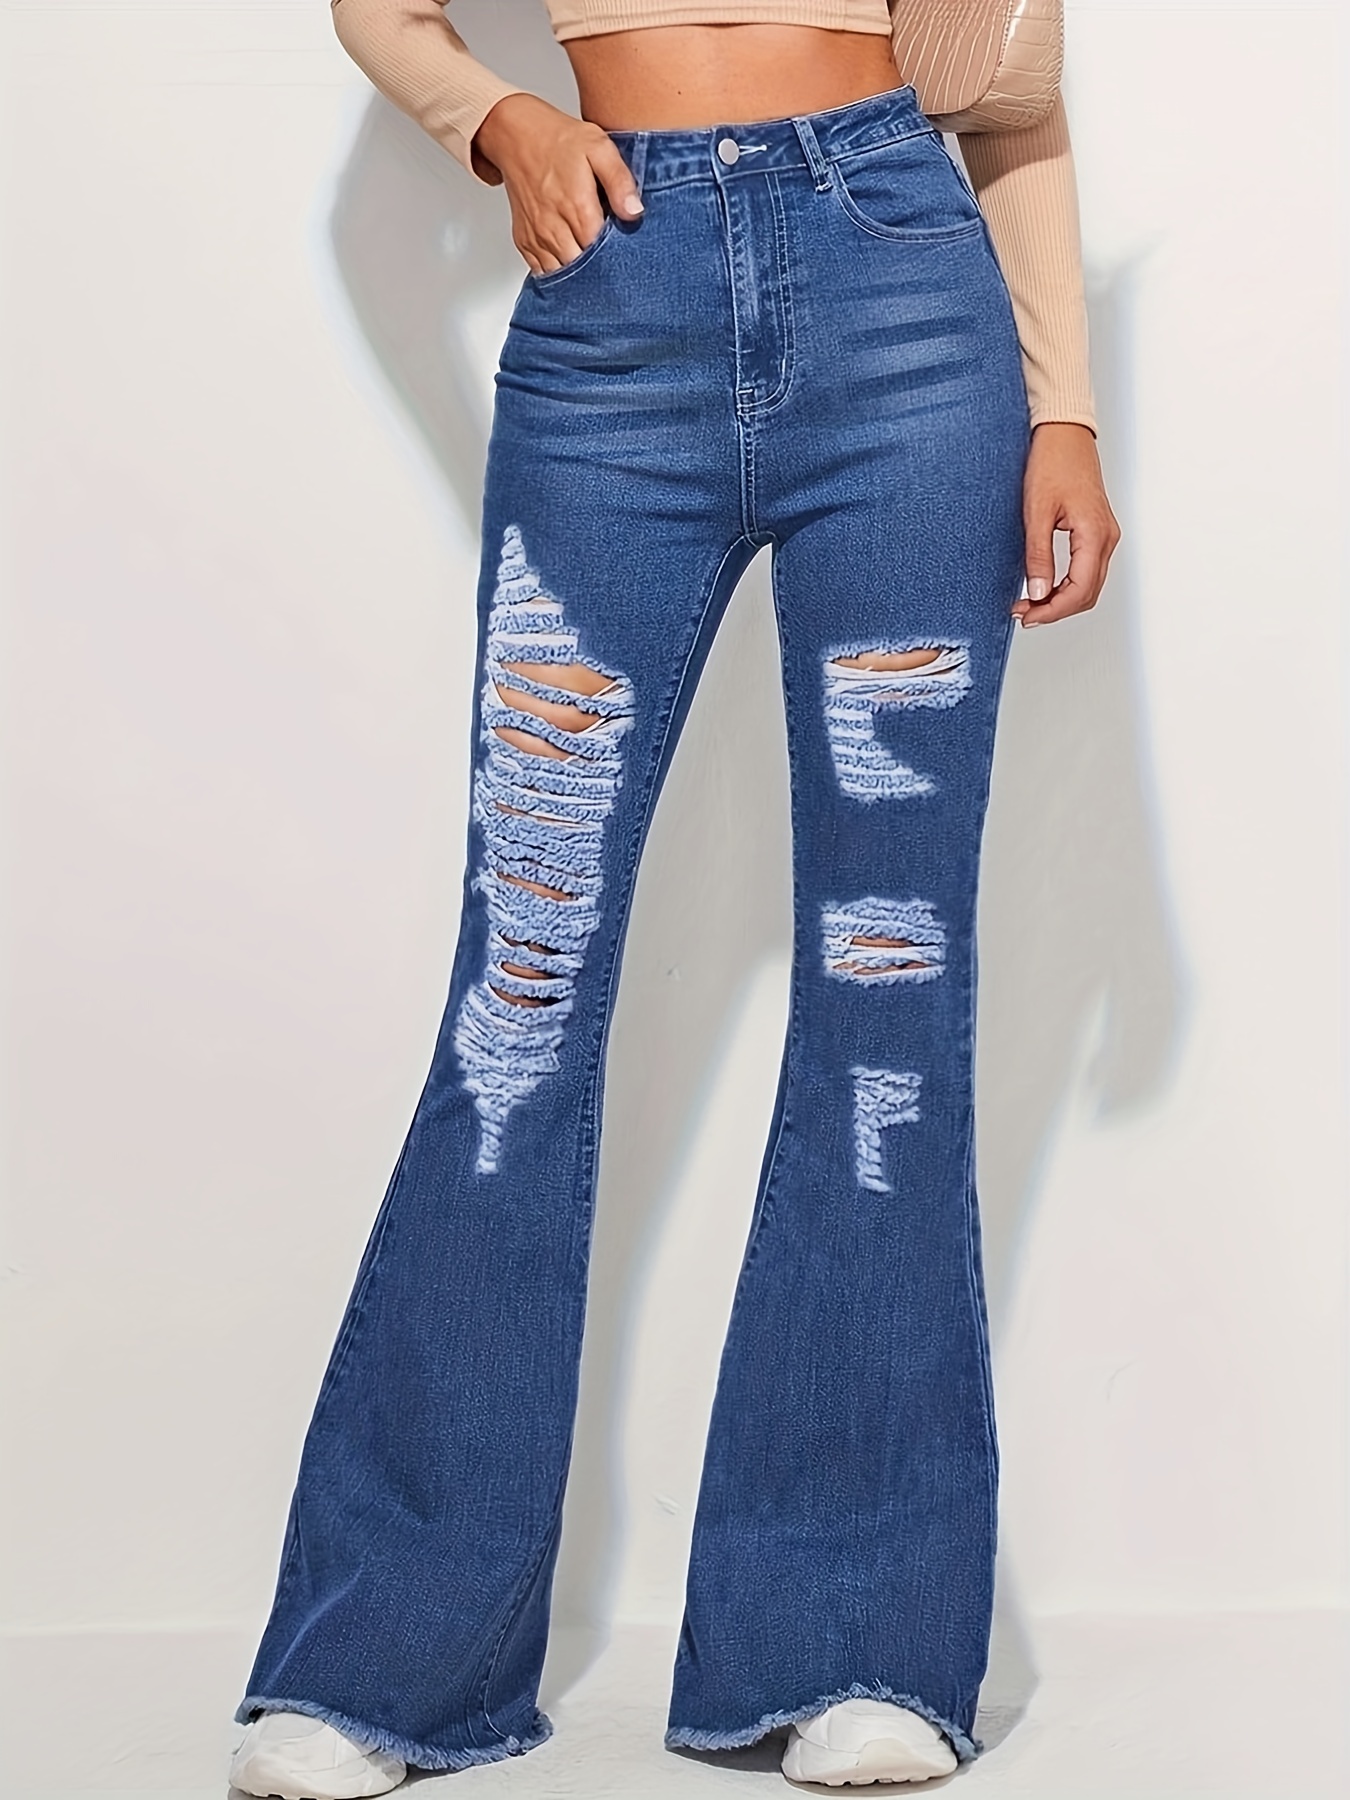 Blue Ripped Holes Flared Jeans, Lace Up Distressed Bell Bottom Casual Denim  Pants, Women's Denim Jeans & Clothing